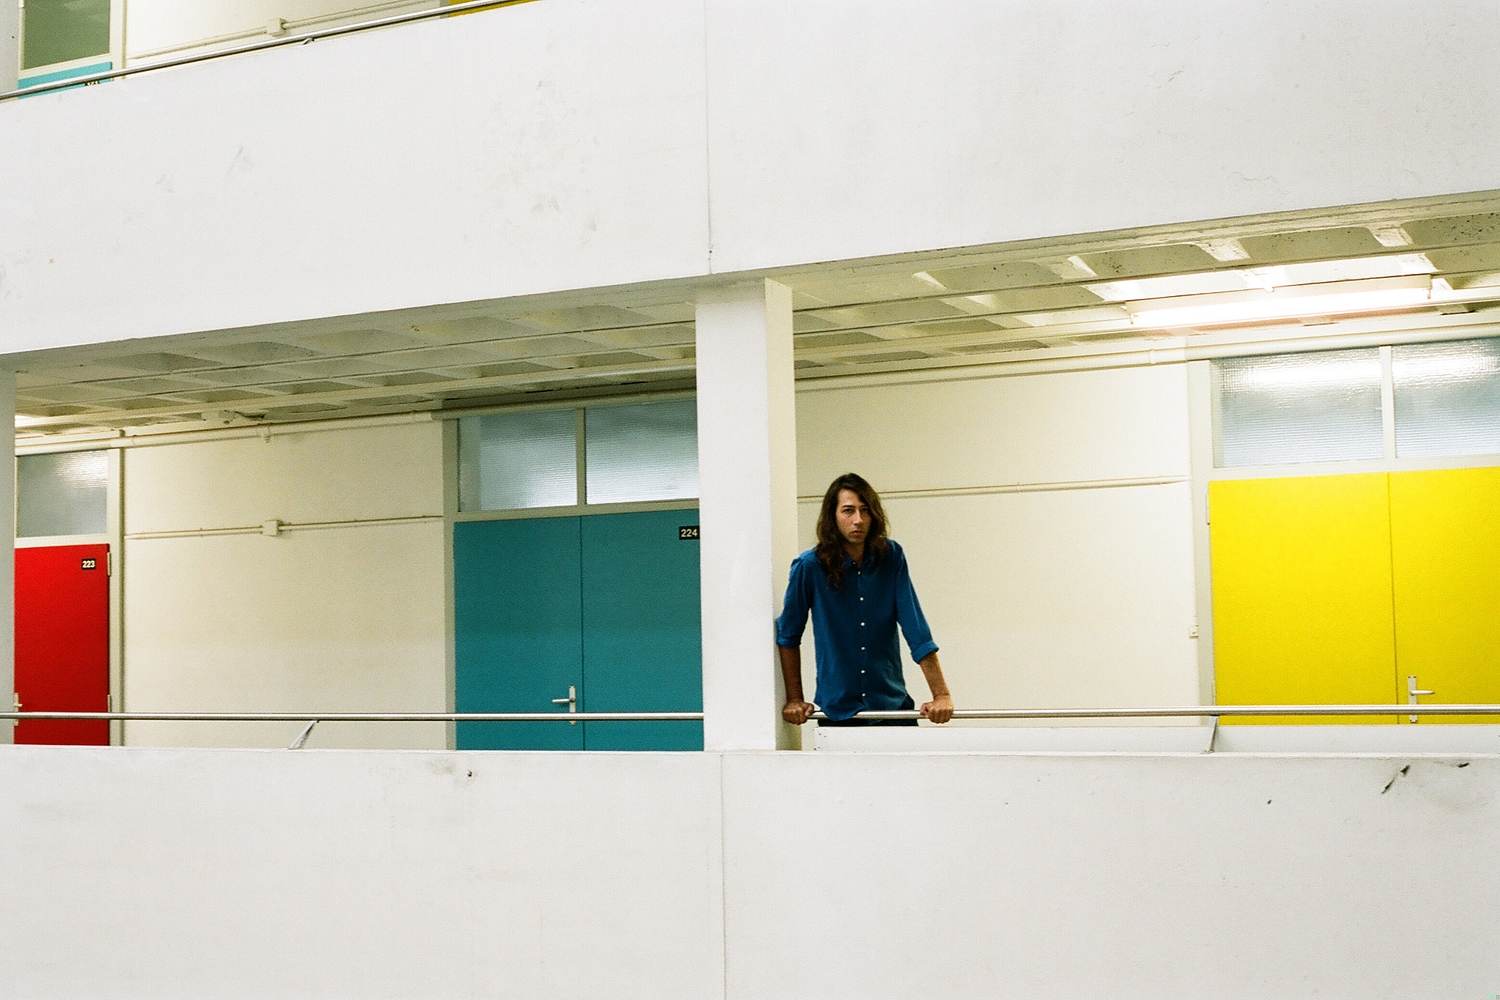 Kindness shares new ‘8th Wonder’ song in BBC ‘Bedtime Mix’, streams album in full